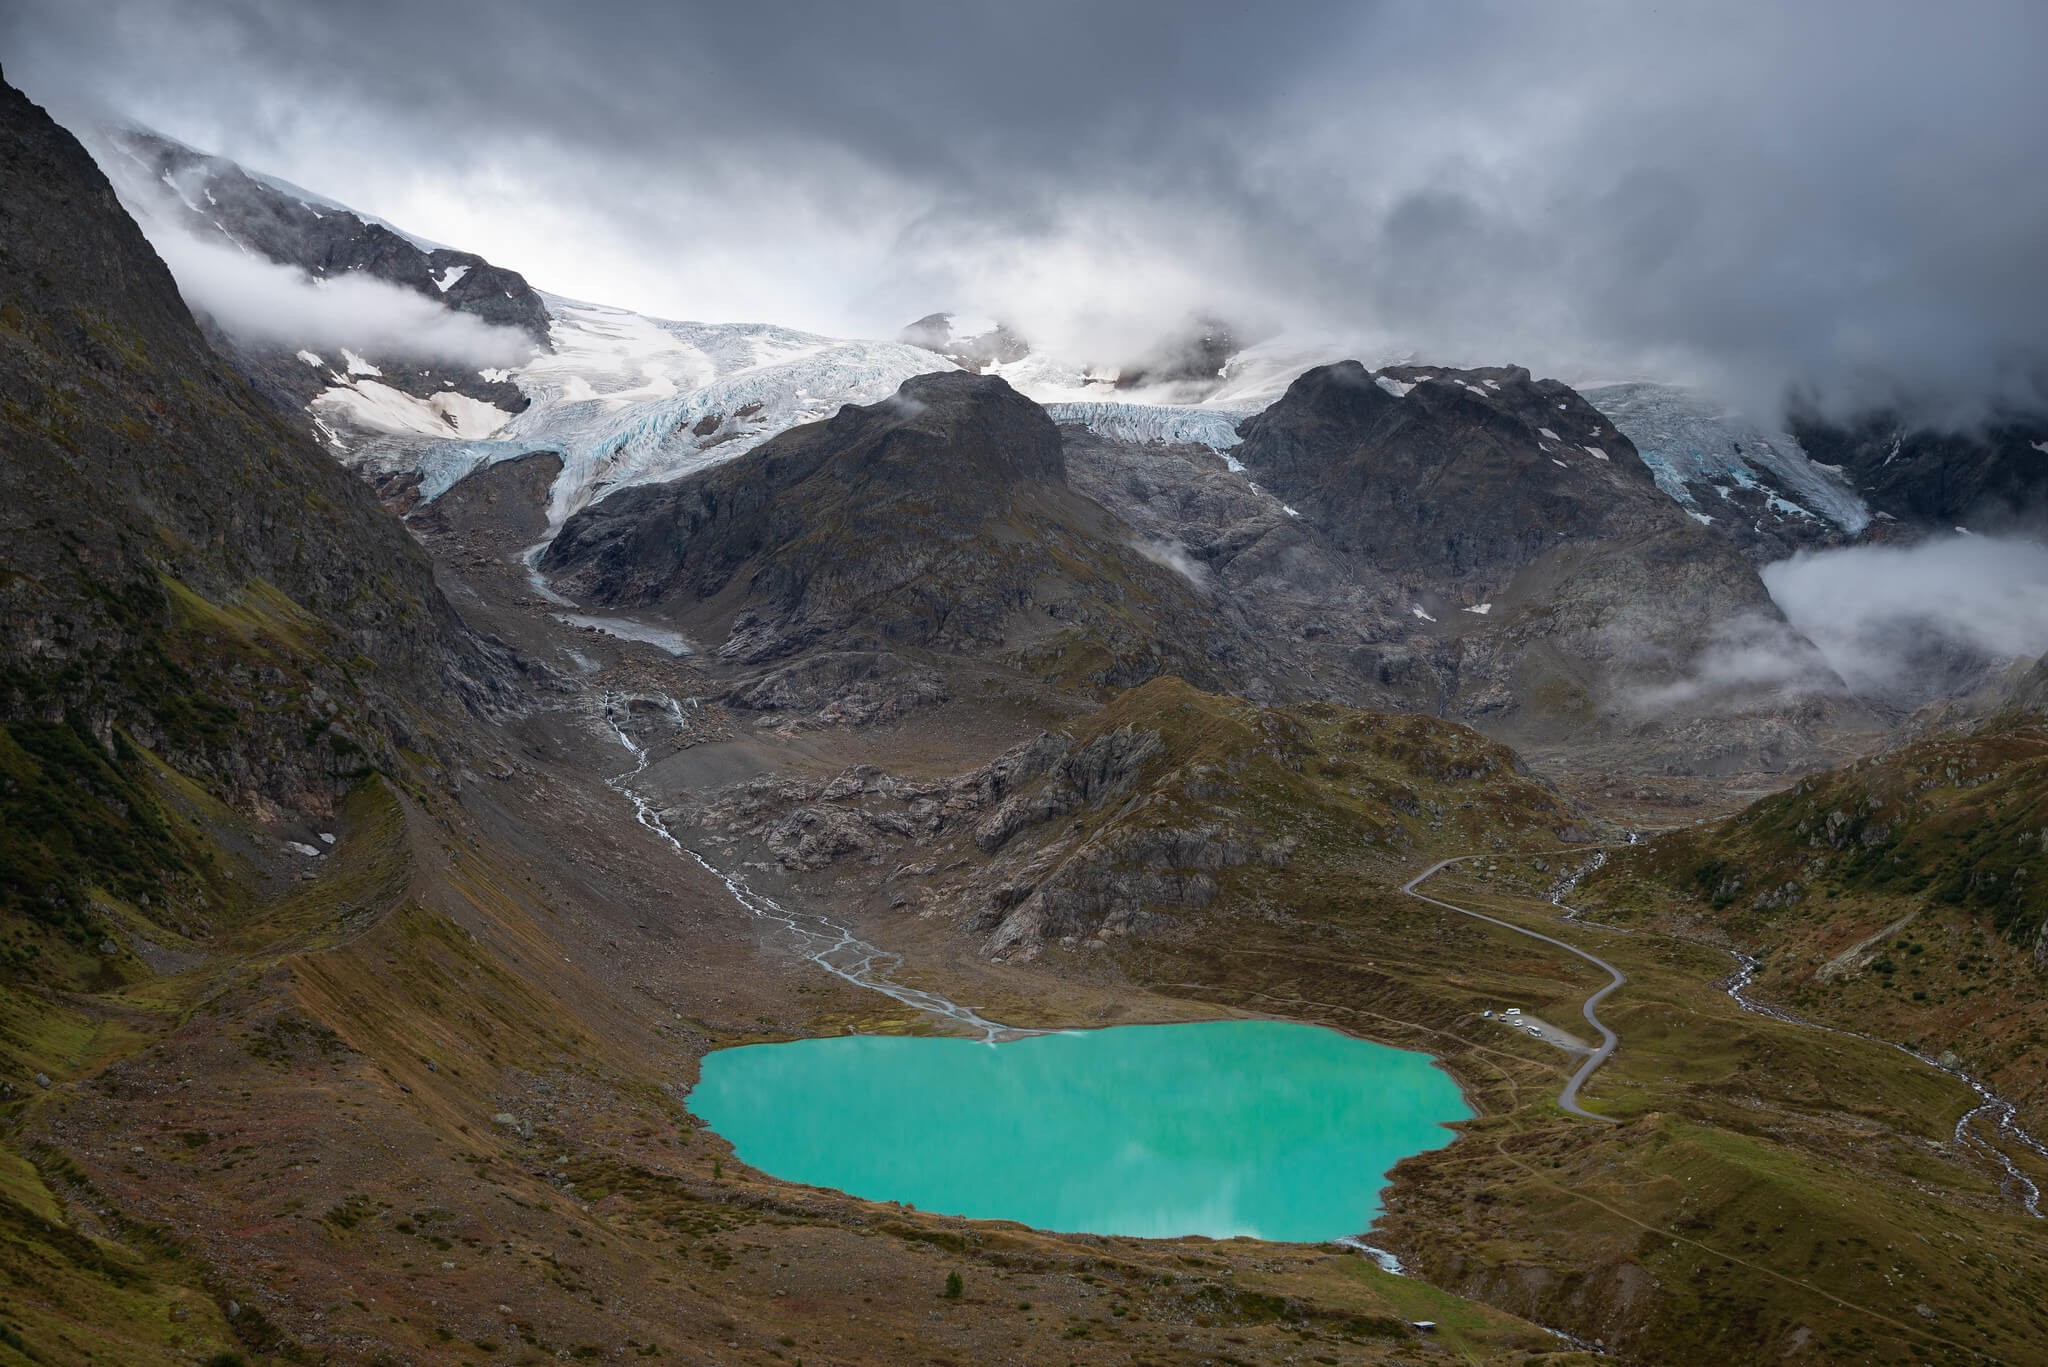 the blue waters of the Steinsee lake and Steingletscher, a glacier in the background on a cloudy day in the Swiss alps.